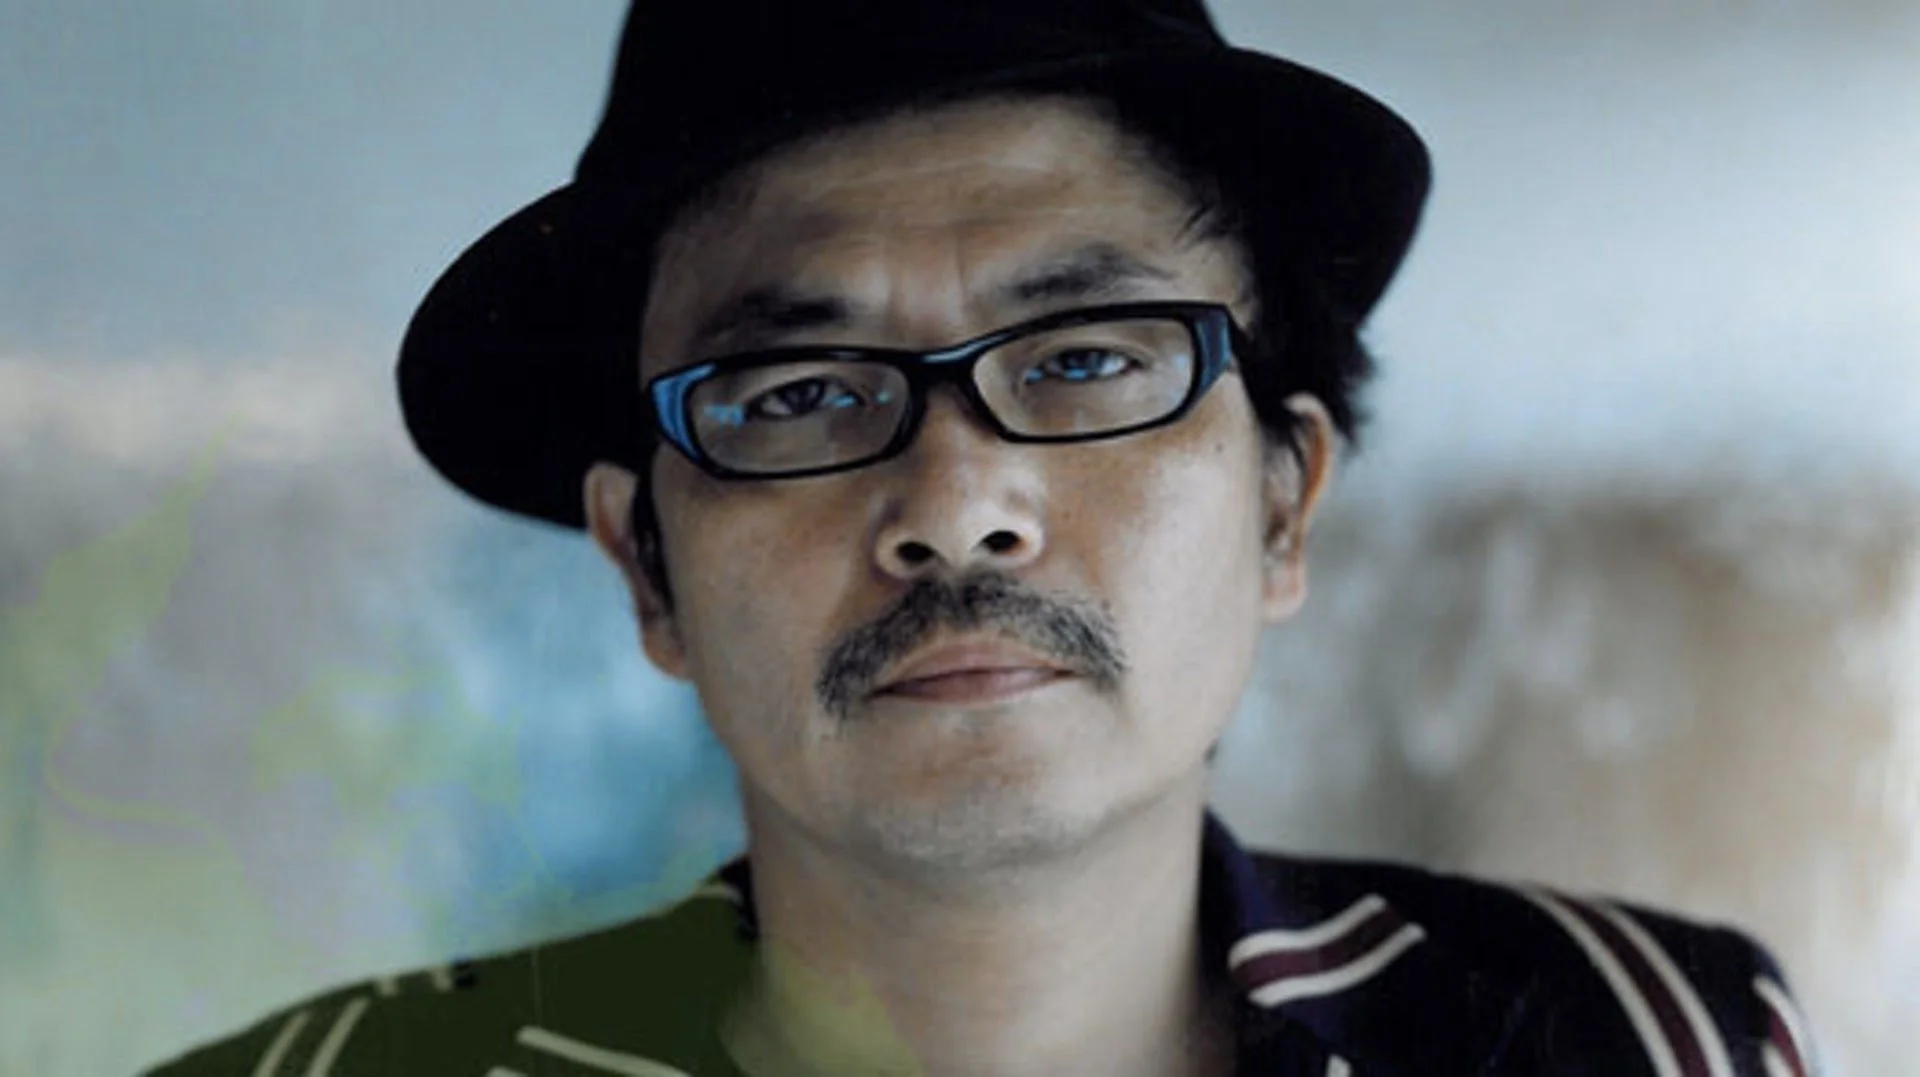 Sion Sono apologises in handwritten letter to actor he harassed